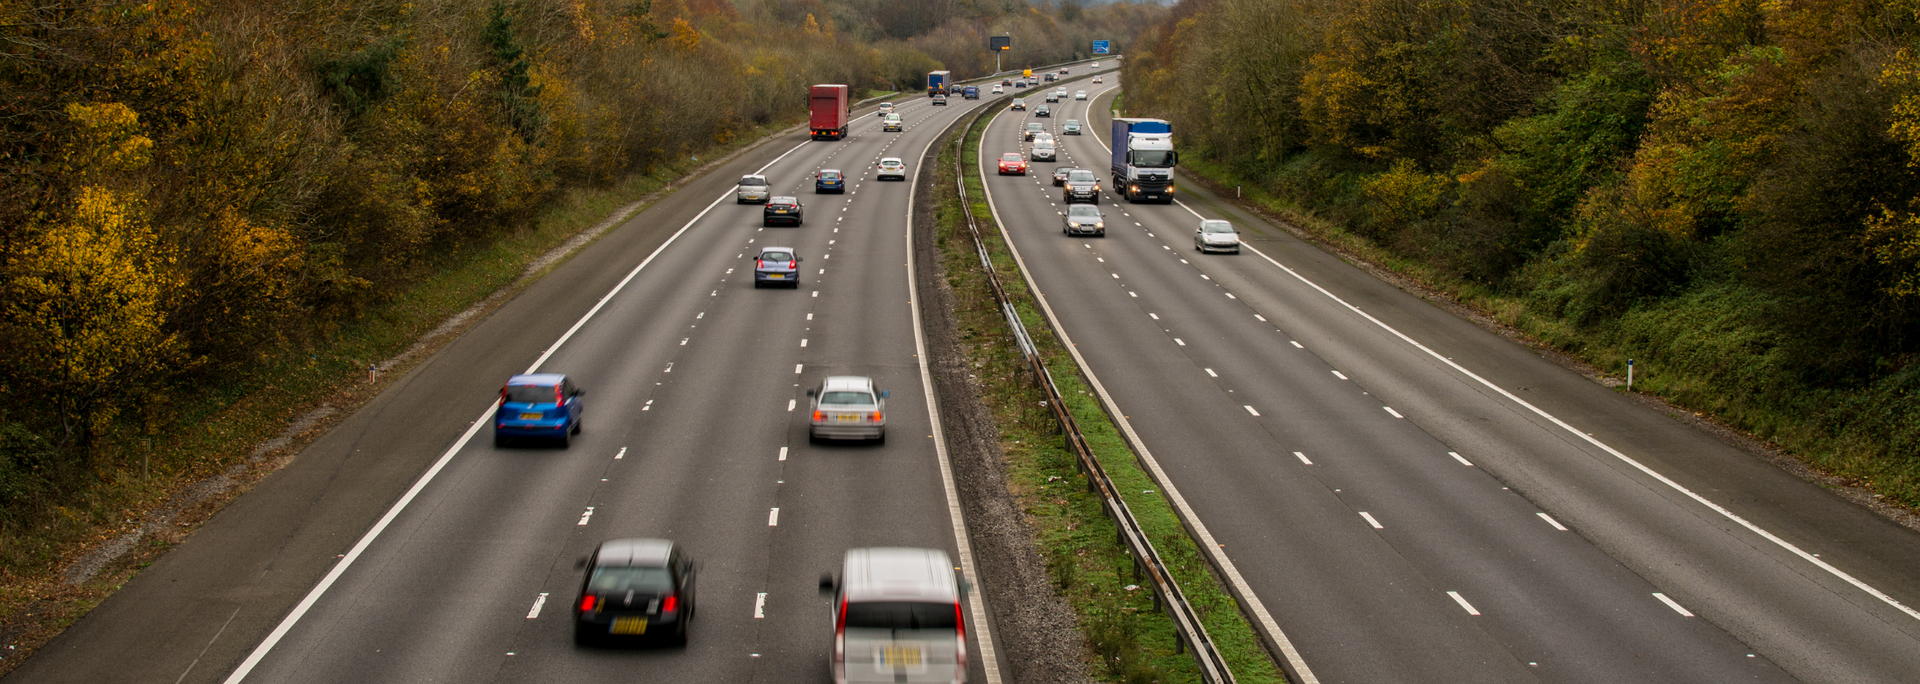 Picture of a UK motorway